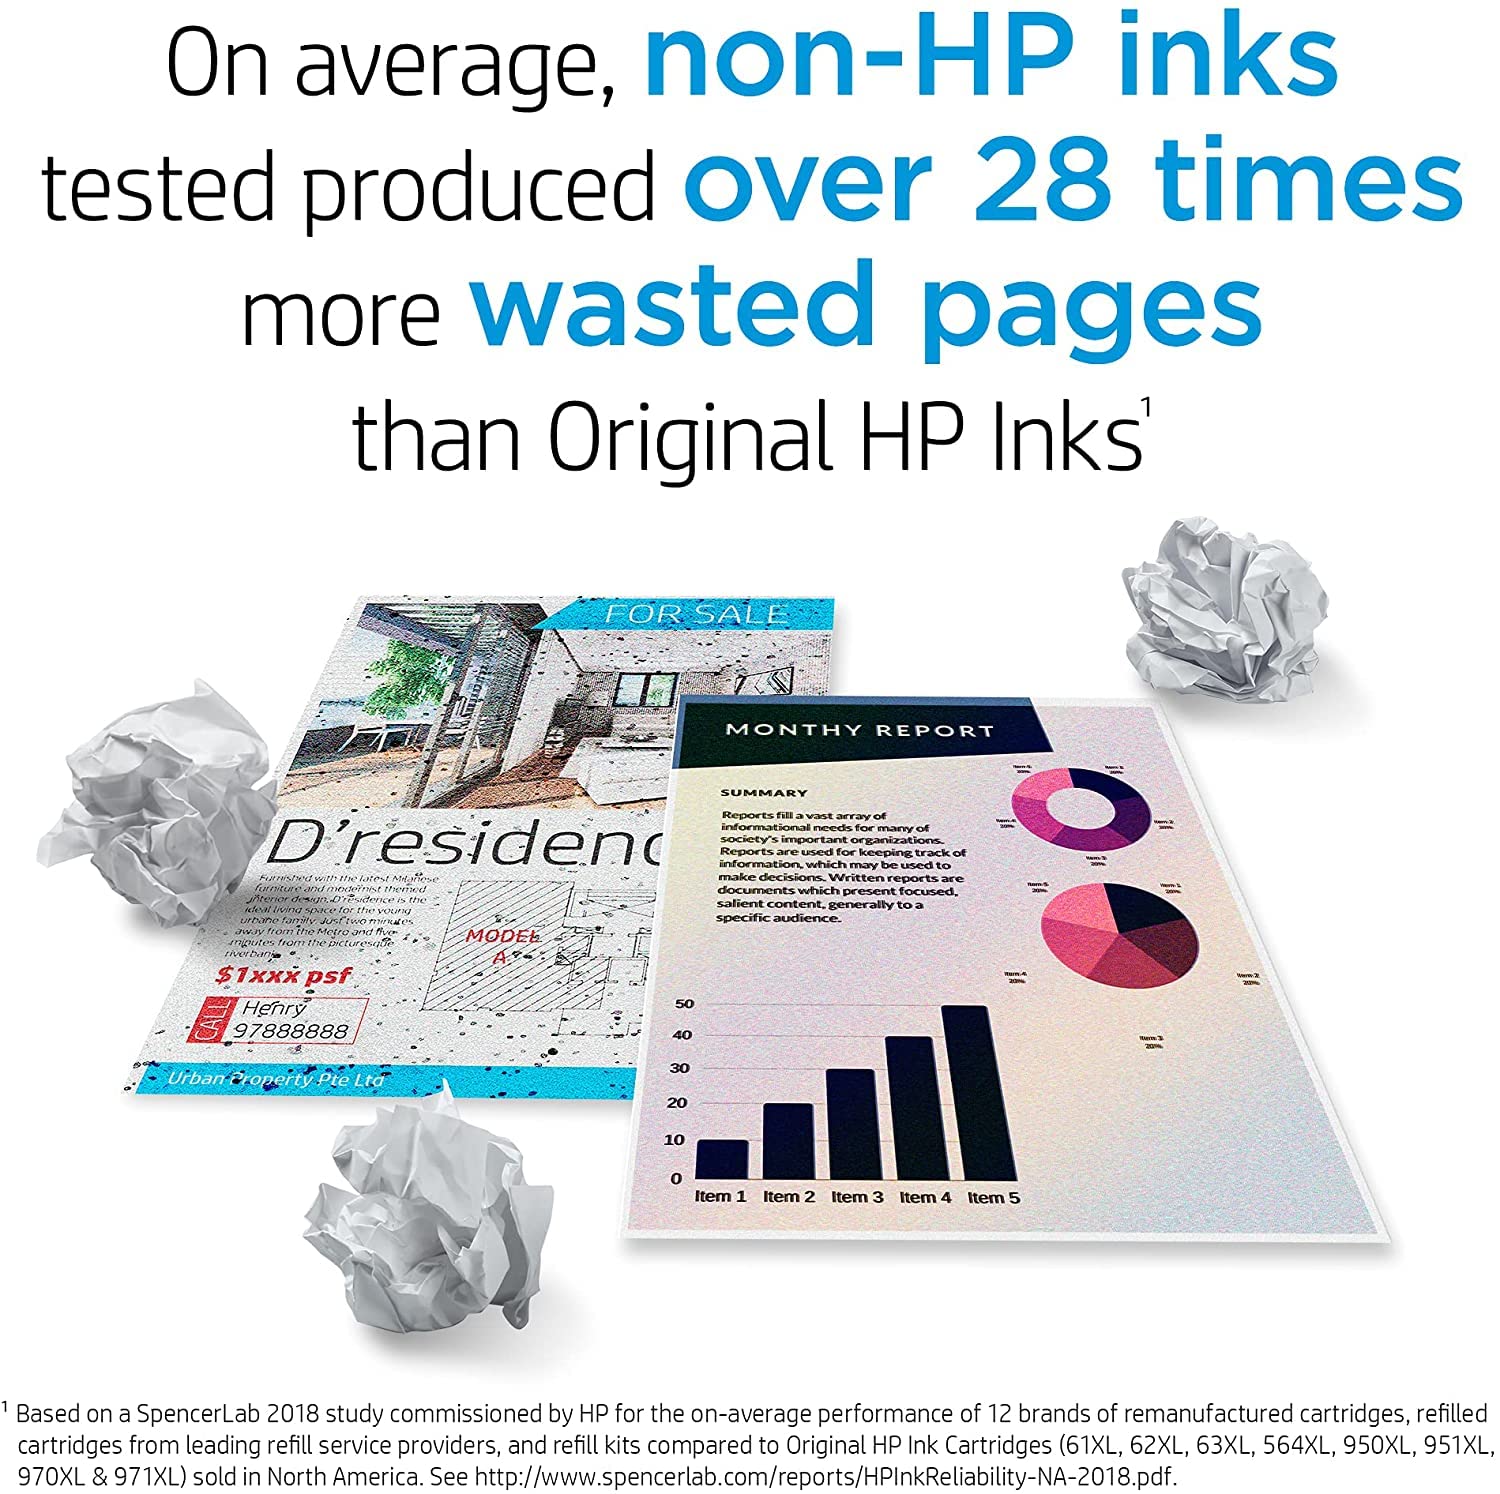 Original HP 60 Tri-color Ink Cartridge | Works with DeskJet D1660, D2500, D2600, D5560, F2400, F4200, F4400, F4580; ENVY 100, 110, 120; PhotoSmart C4600, C4700, D110a Series | CC643WN